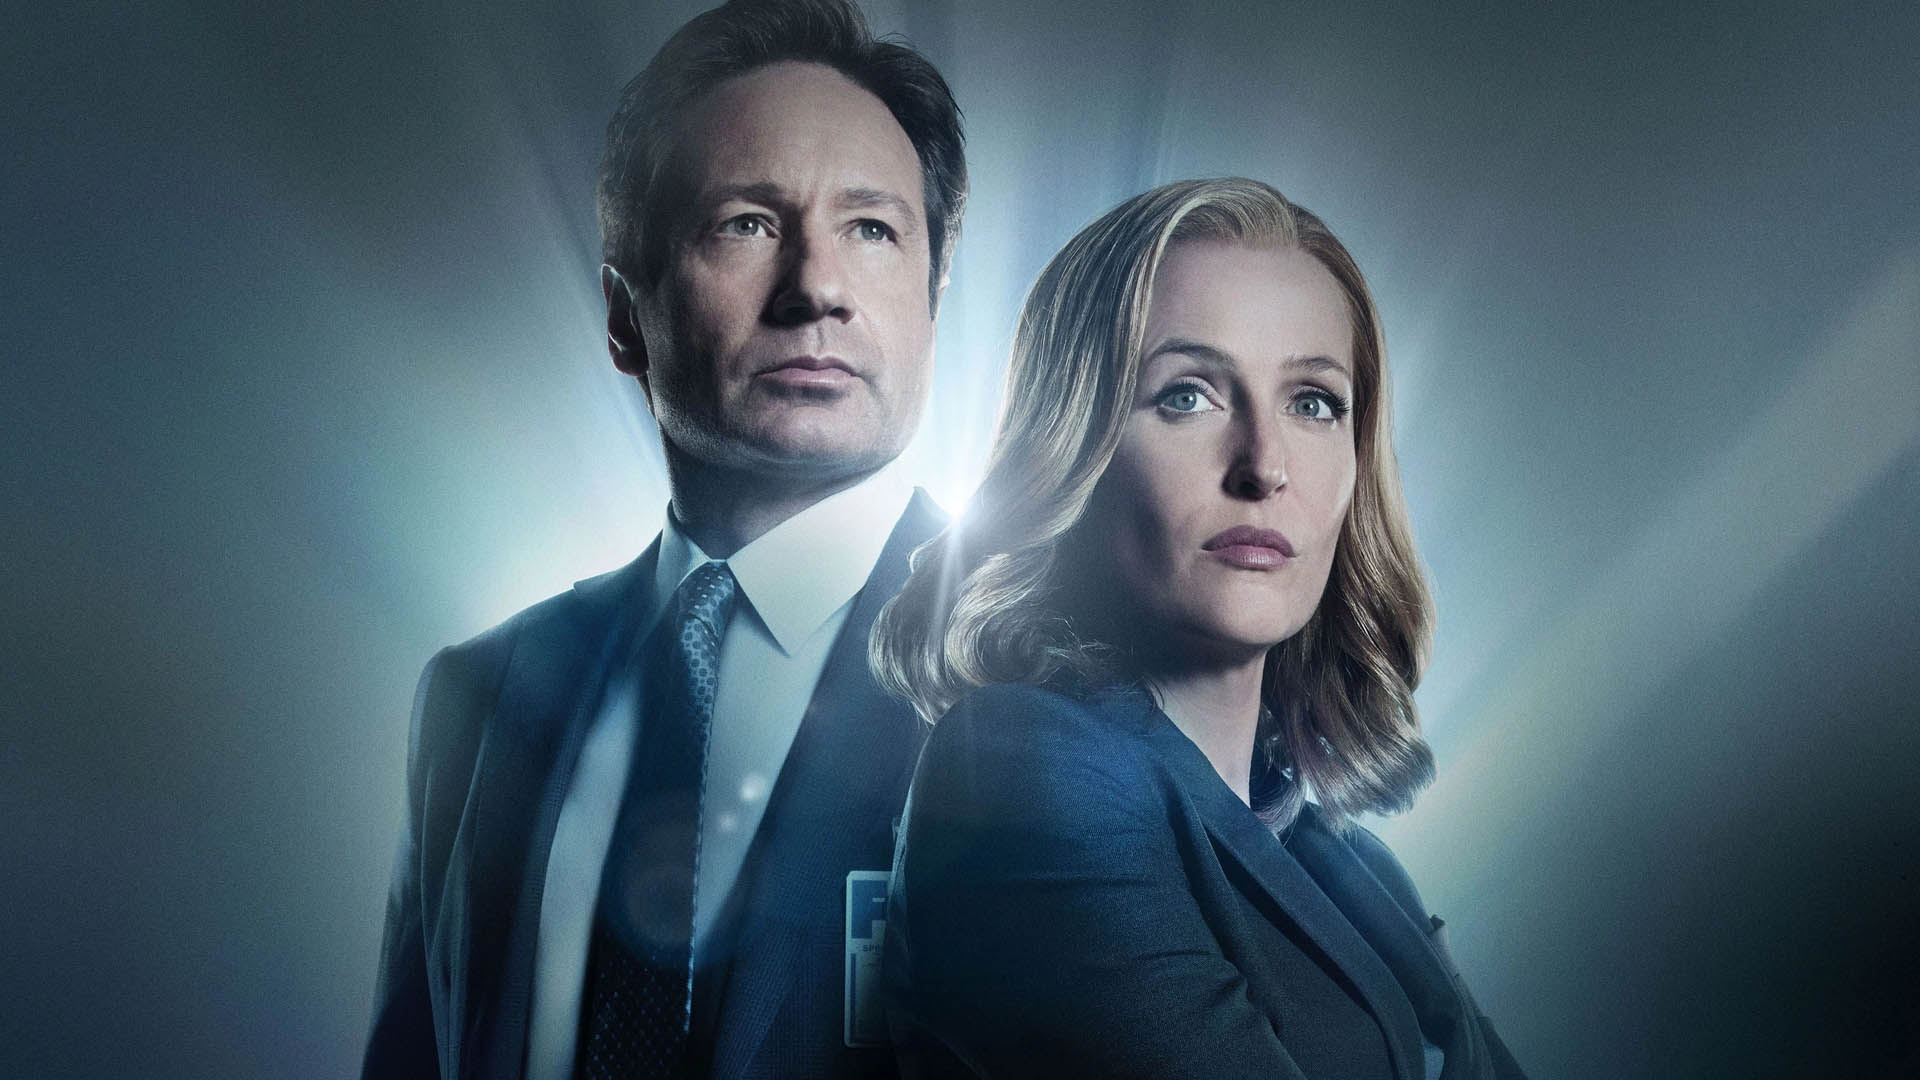 1920x1080 140+ The X-Files HD Wallpapers and Backgrounds